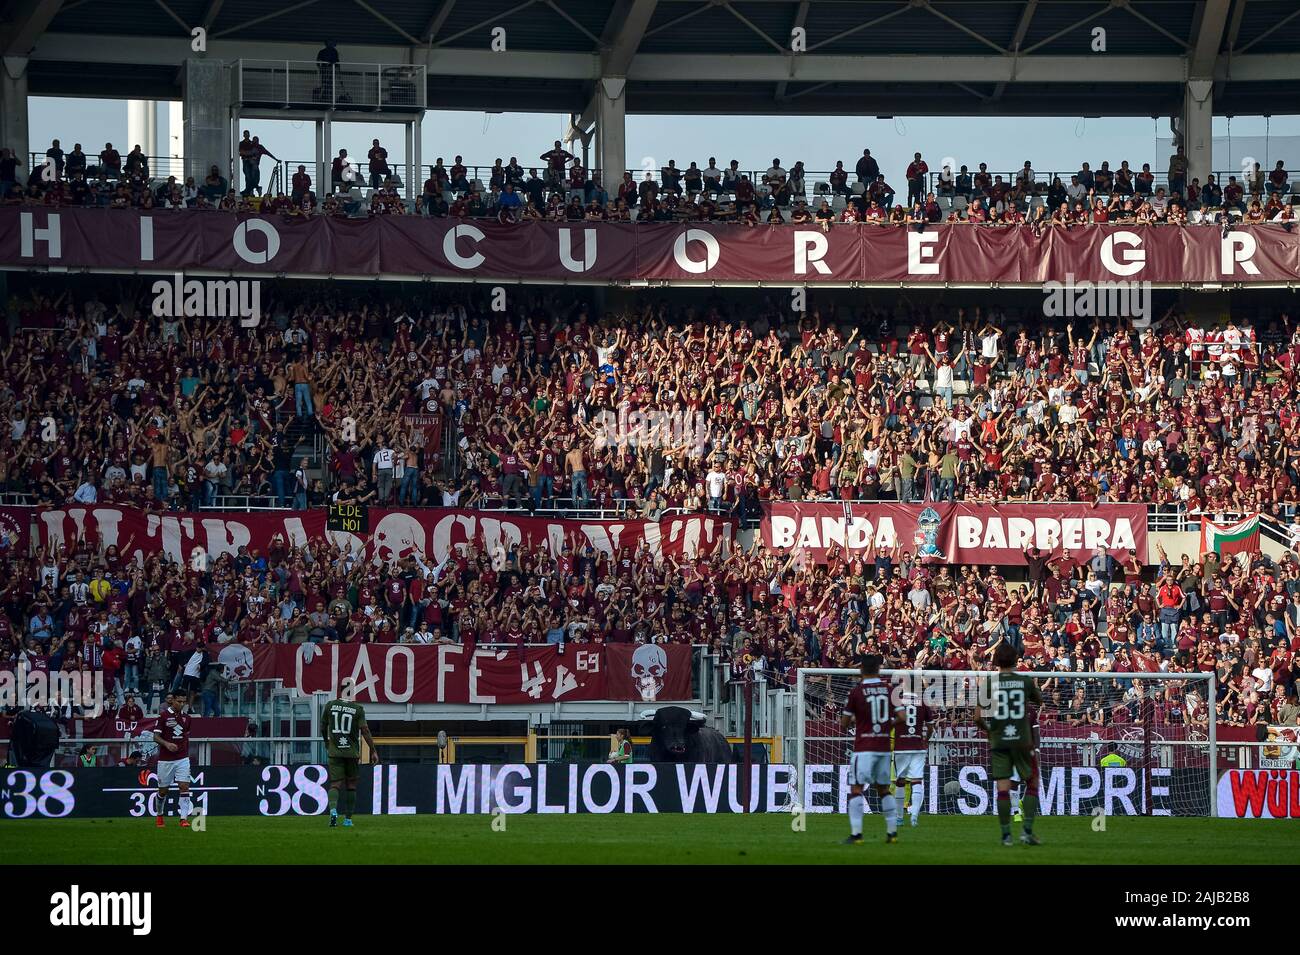 Turin, Italy - 27 October, 2019: Fans of Torino FC in sector 'Curva  Maratona' show their support during the Serie A football match between Torino  FC and Cagliari Calcio. The match ended